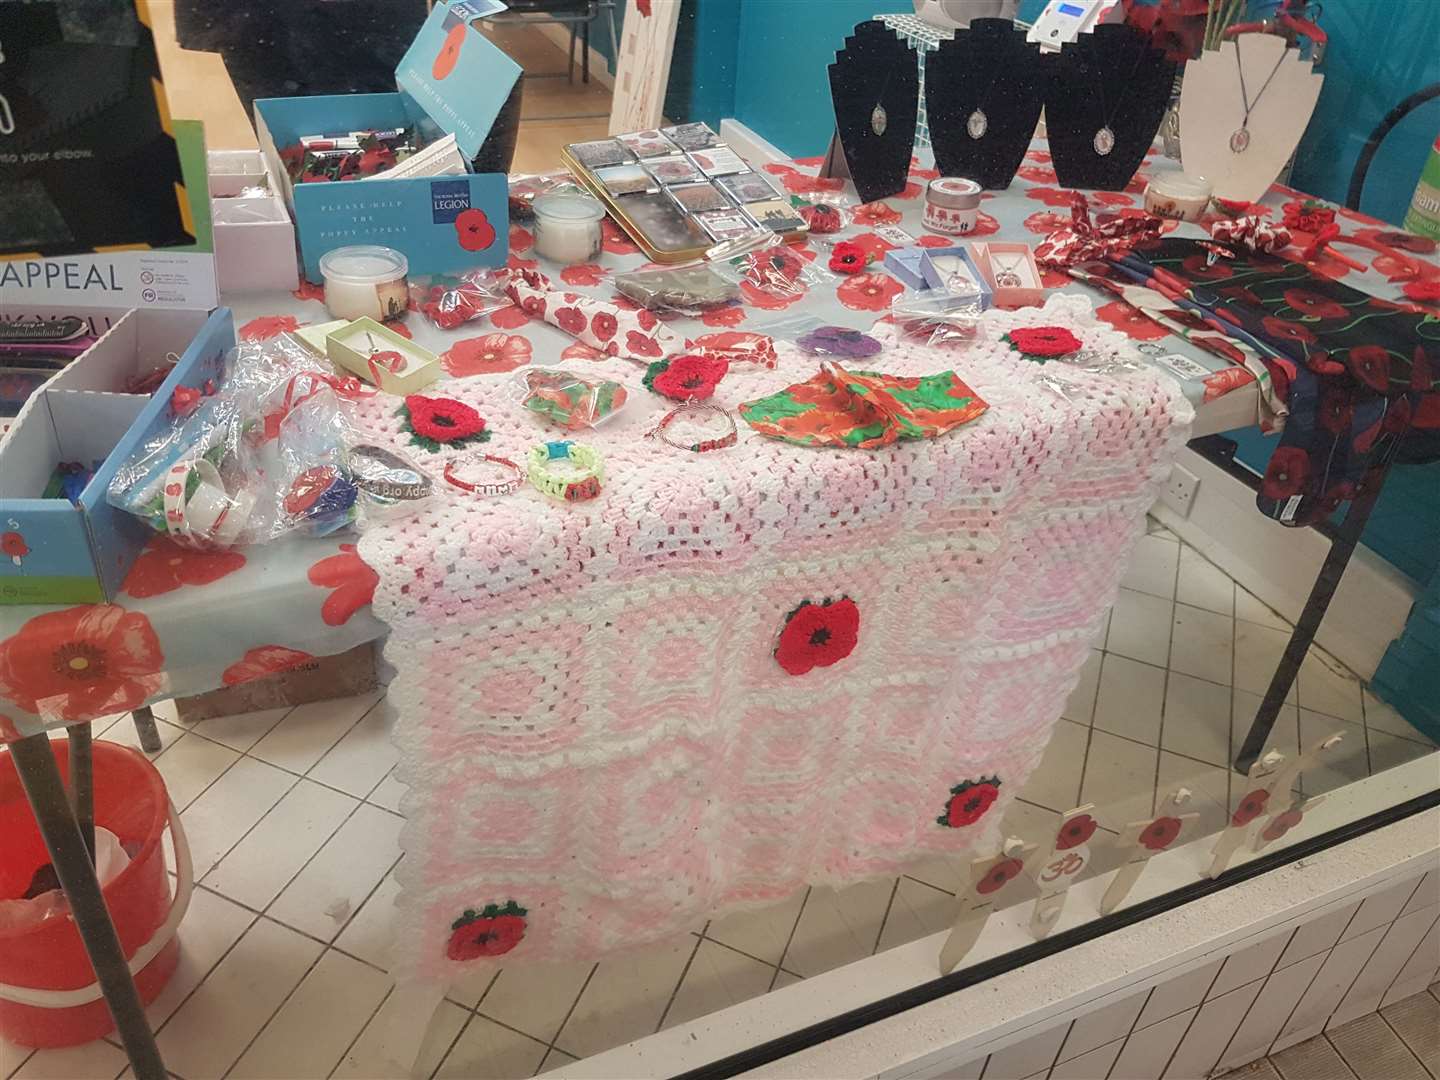 A wide range of accessories are on offer at the pop-up poppy campaign shop